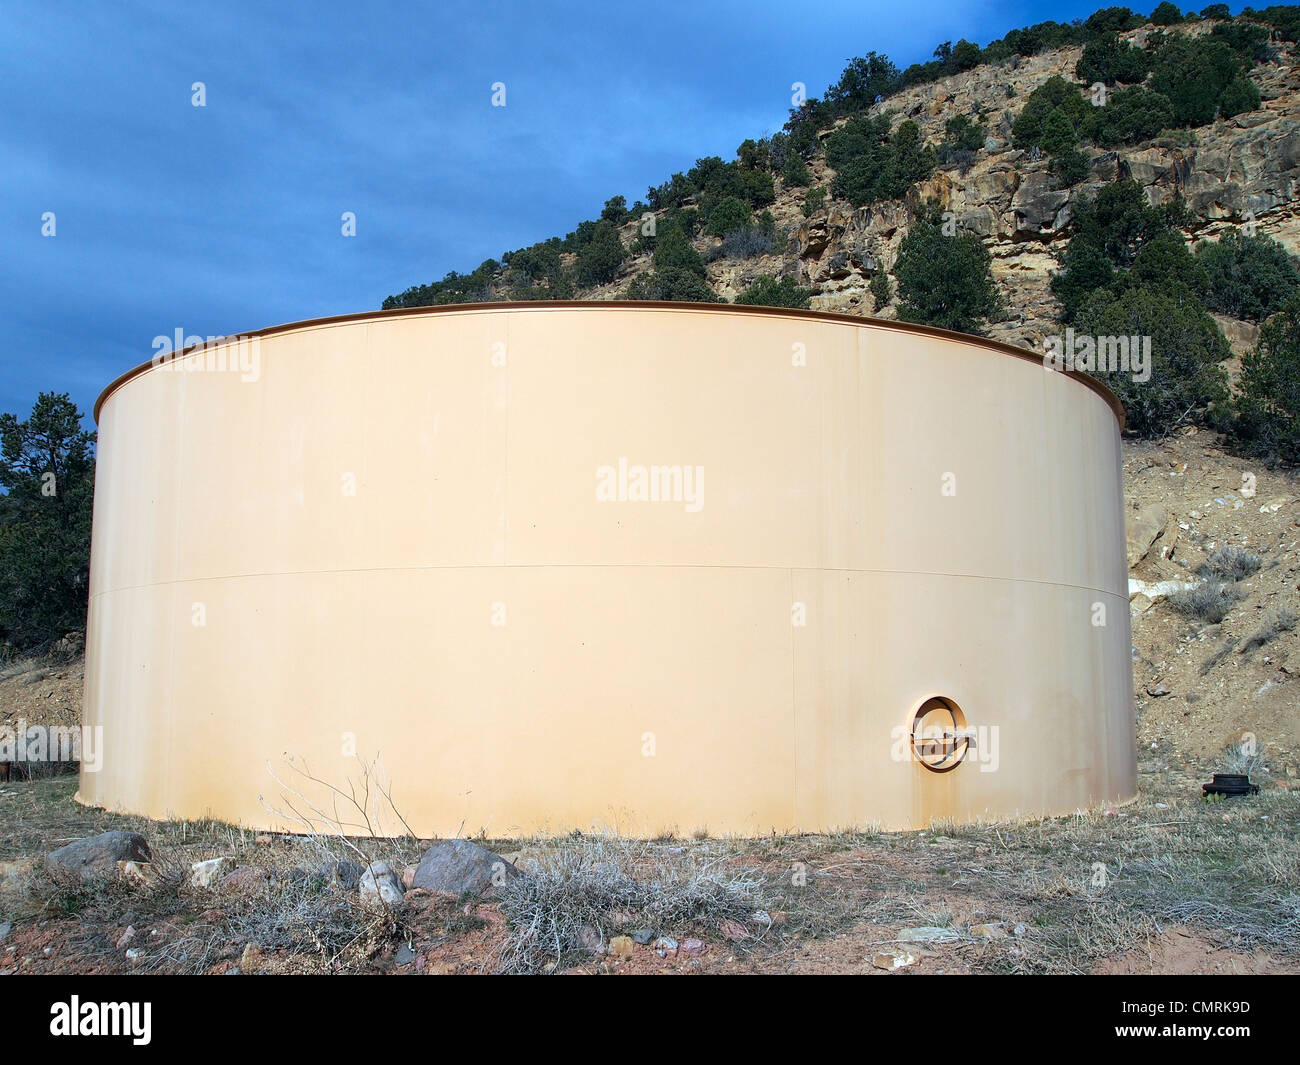 A large culinary water tank on a small hill in a rural community. Stock Photo